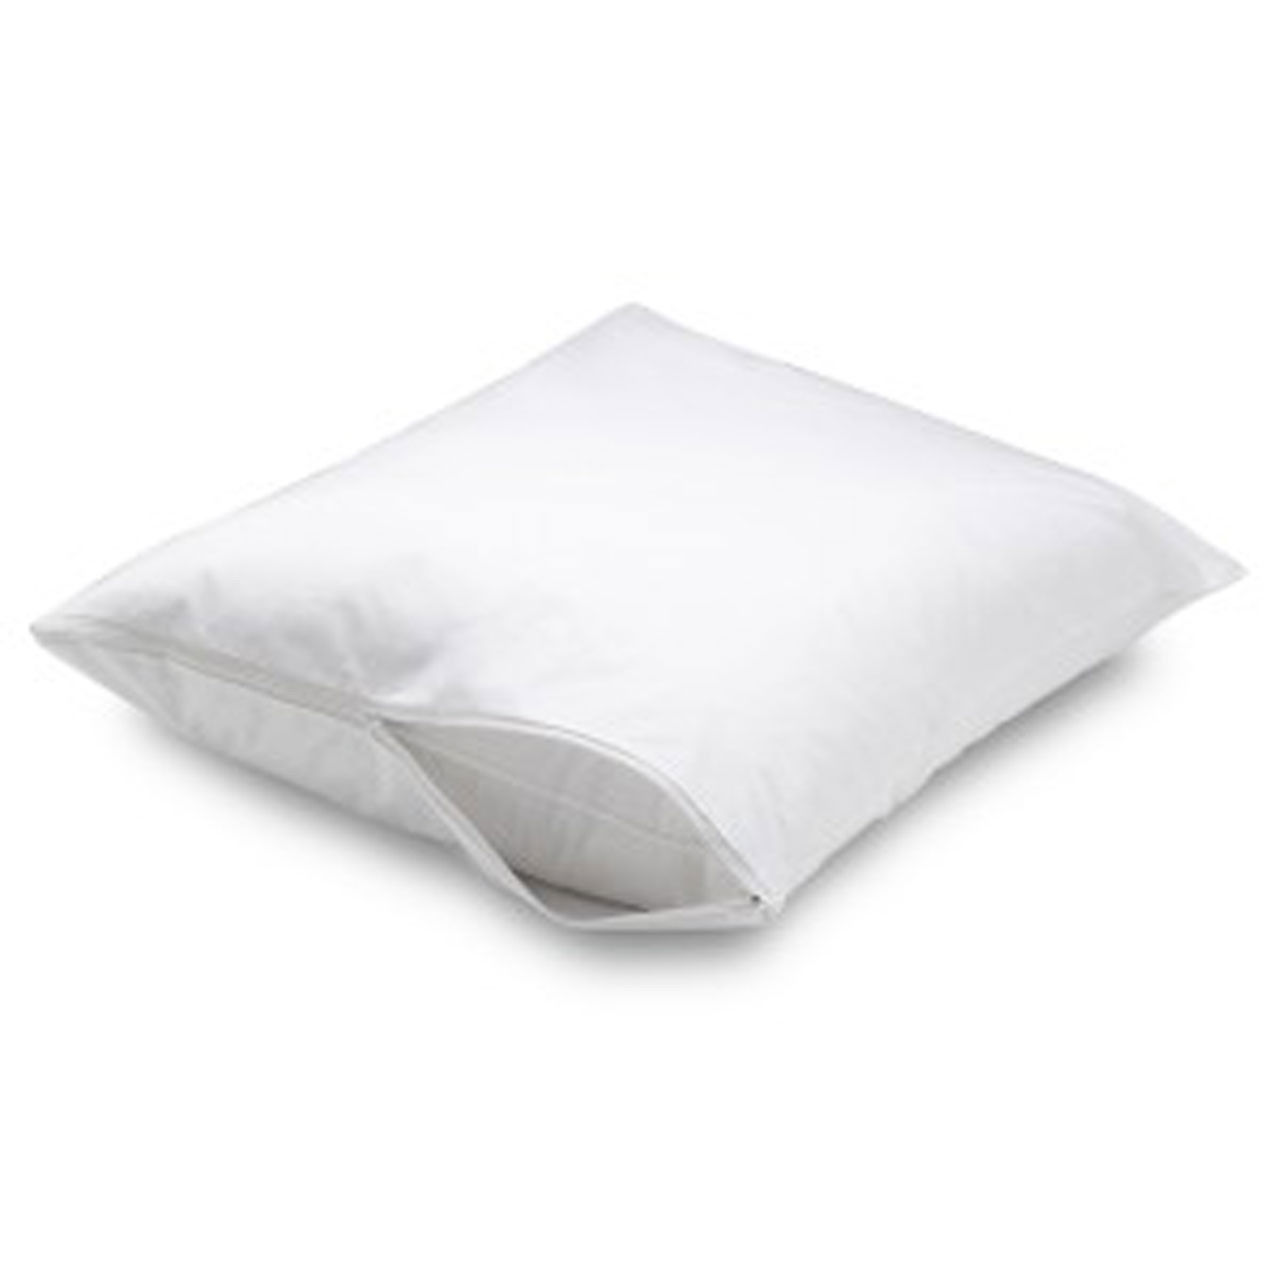 Do the bulk pillow protectors use Woven Zippered fabric?